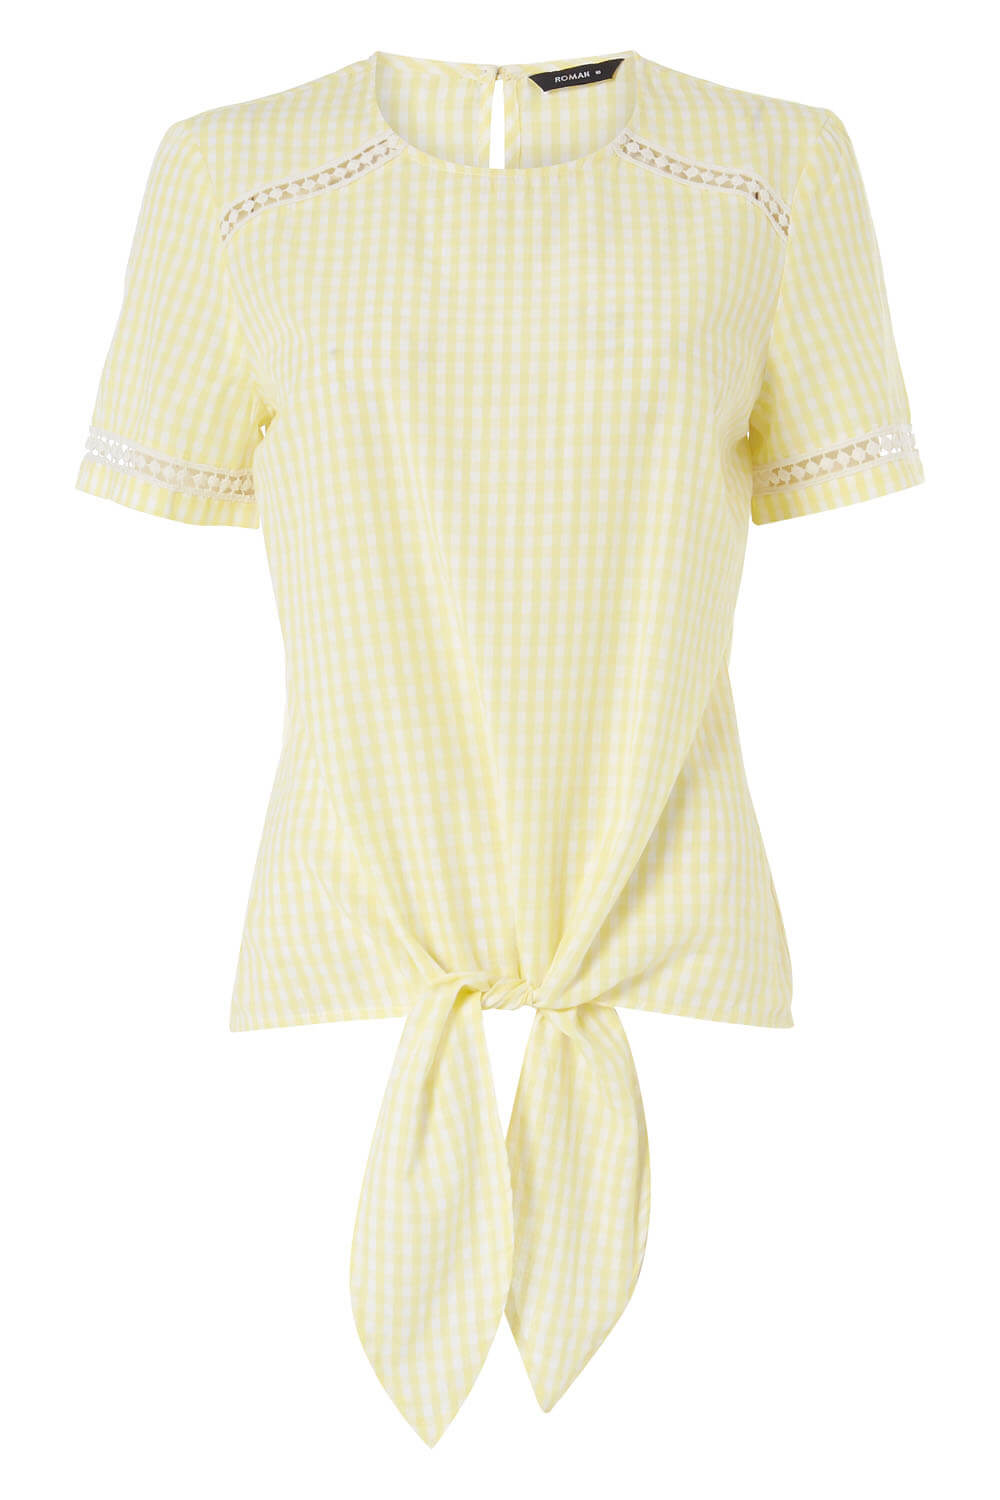 Light Yellow Gingham Print Tie Front Top, Image 4 of 4